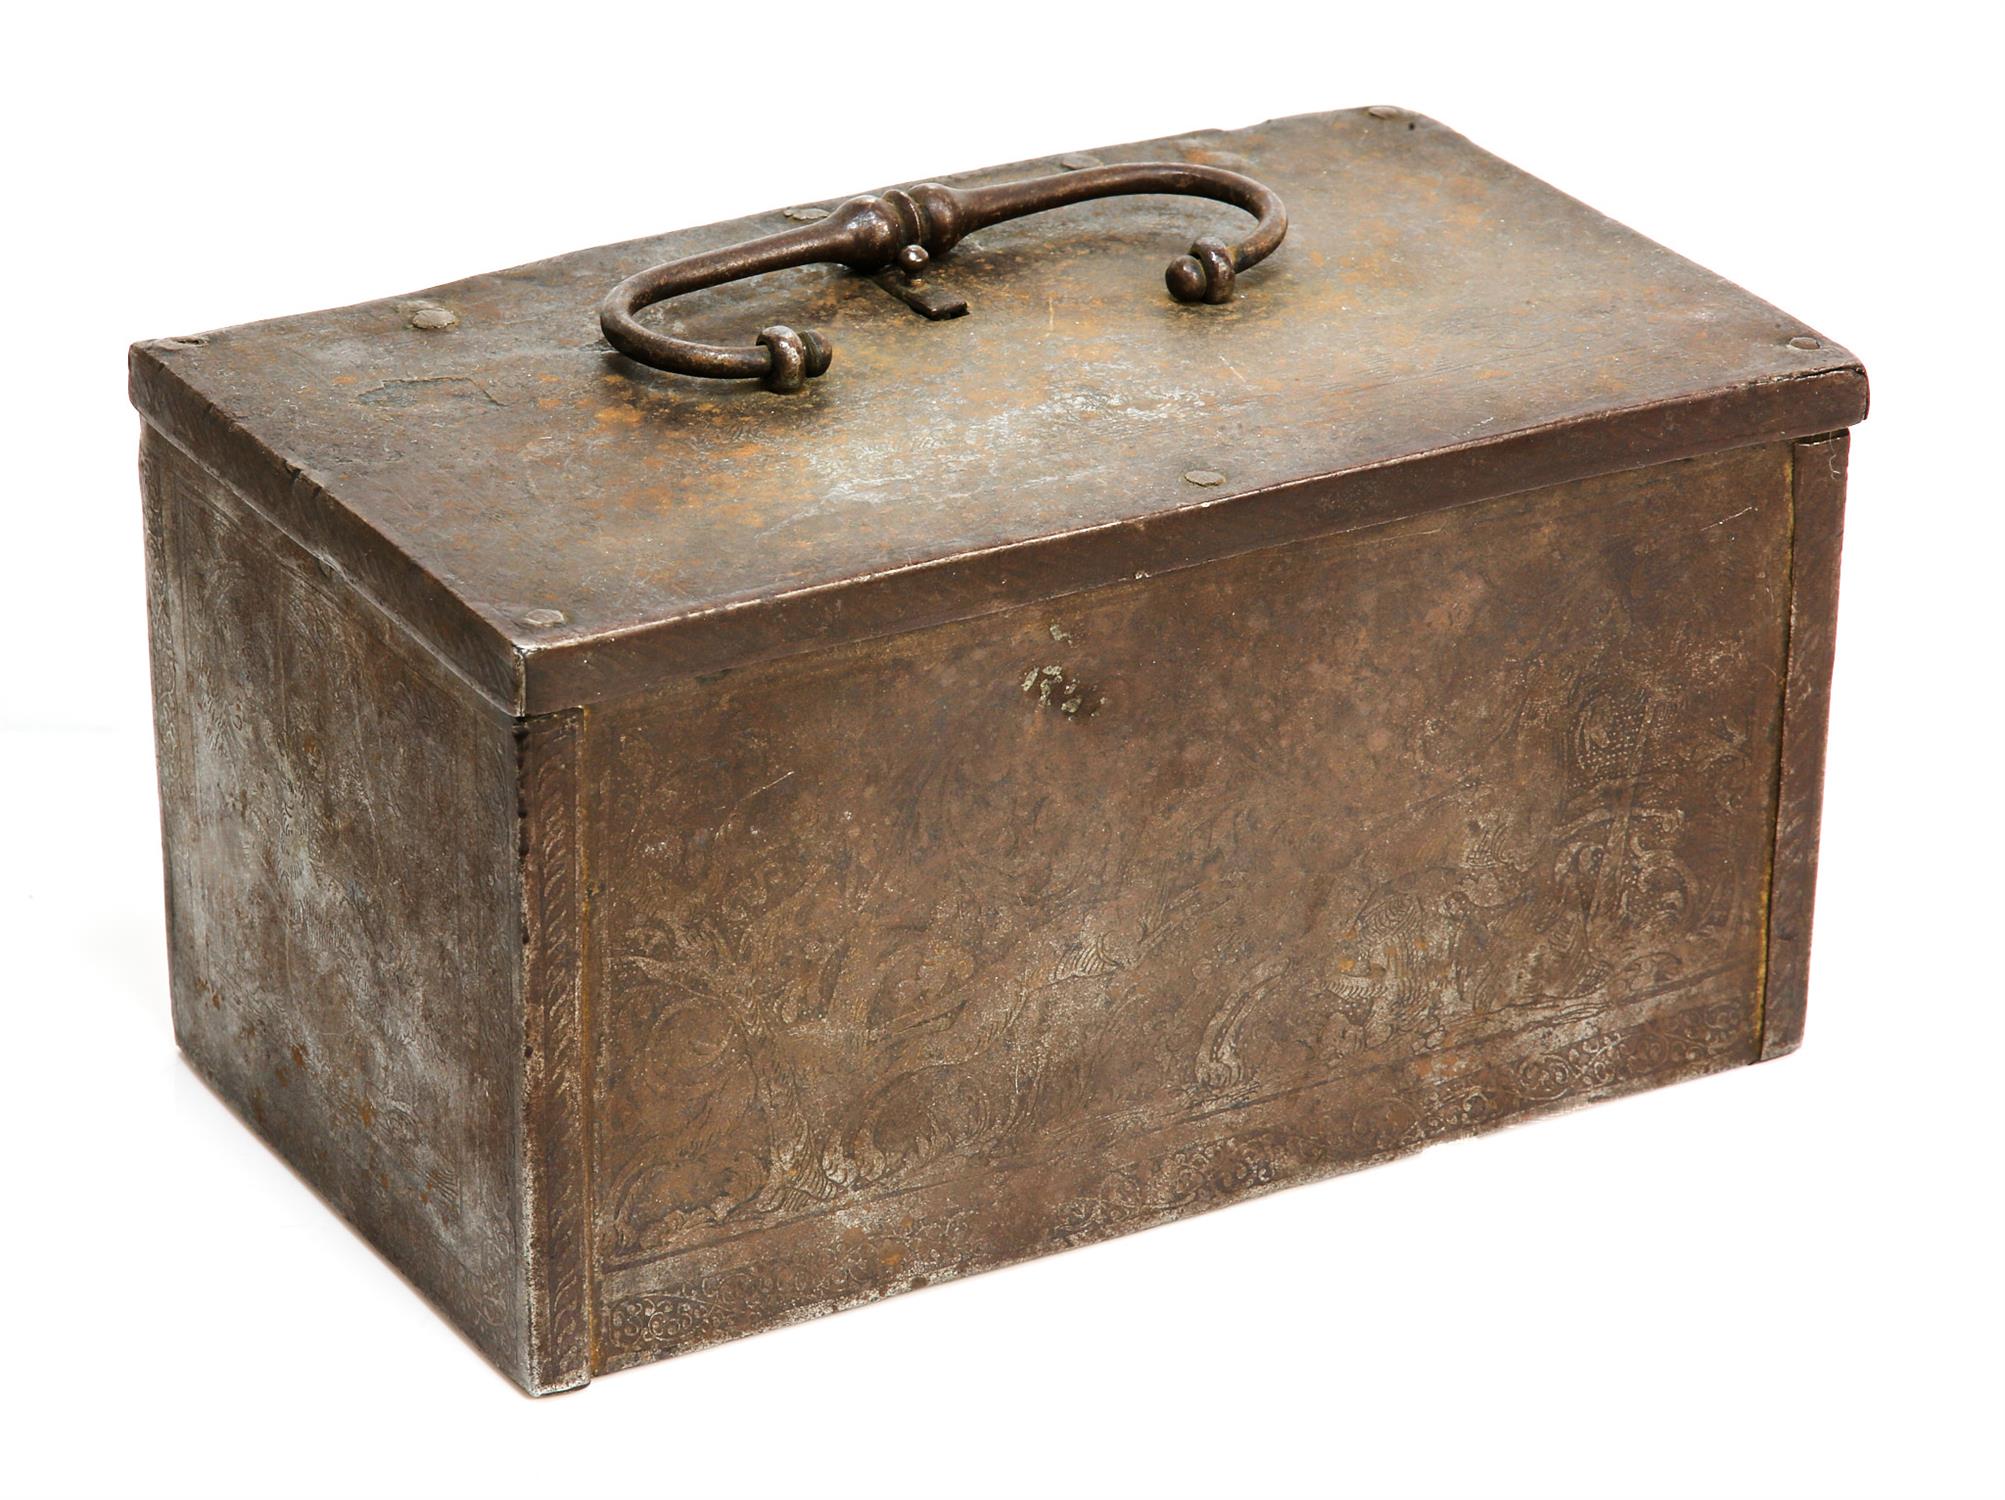 16th/17th century Nuremberg, etched steel table casket or strong-box, the cover with locking - Image 10 of 10